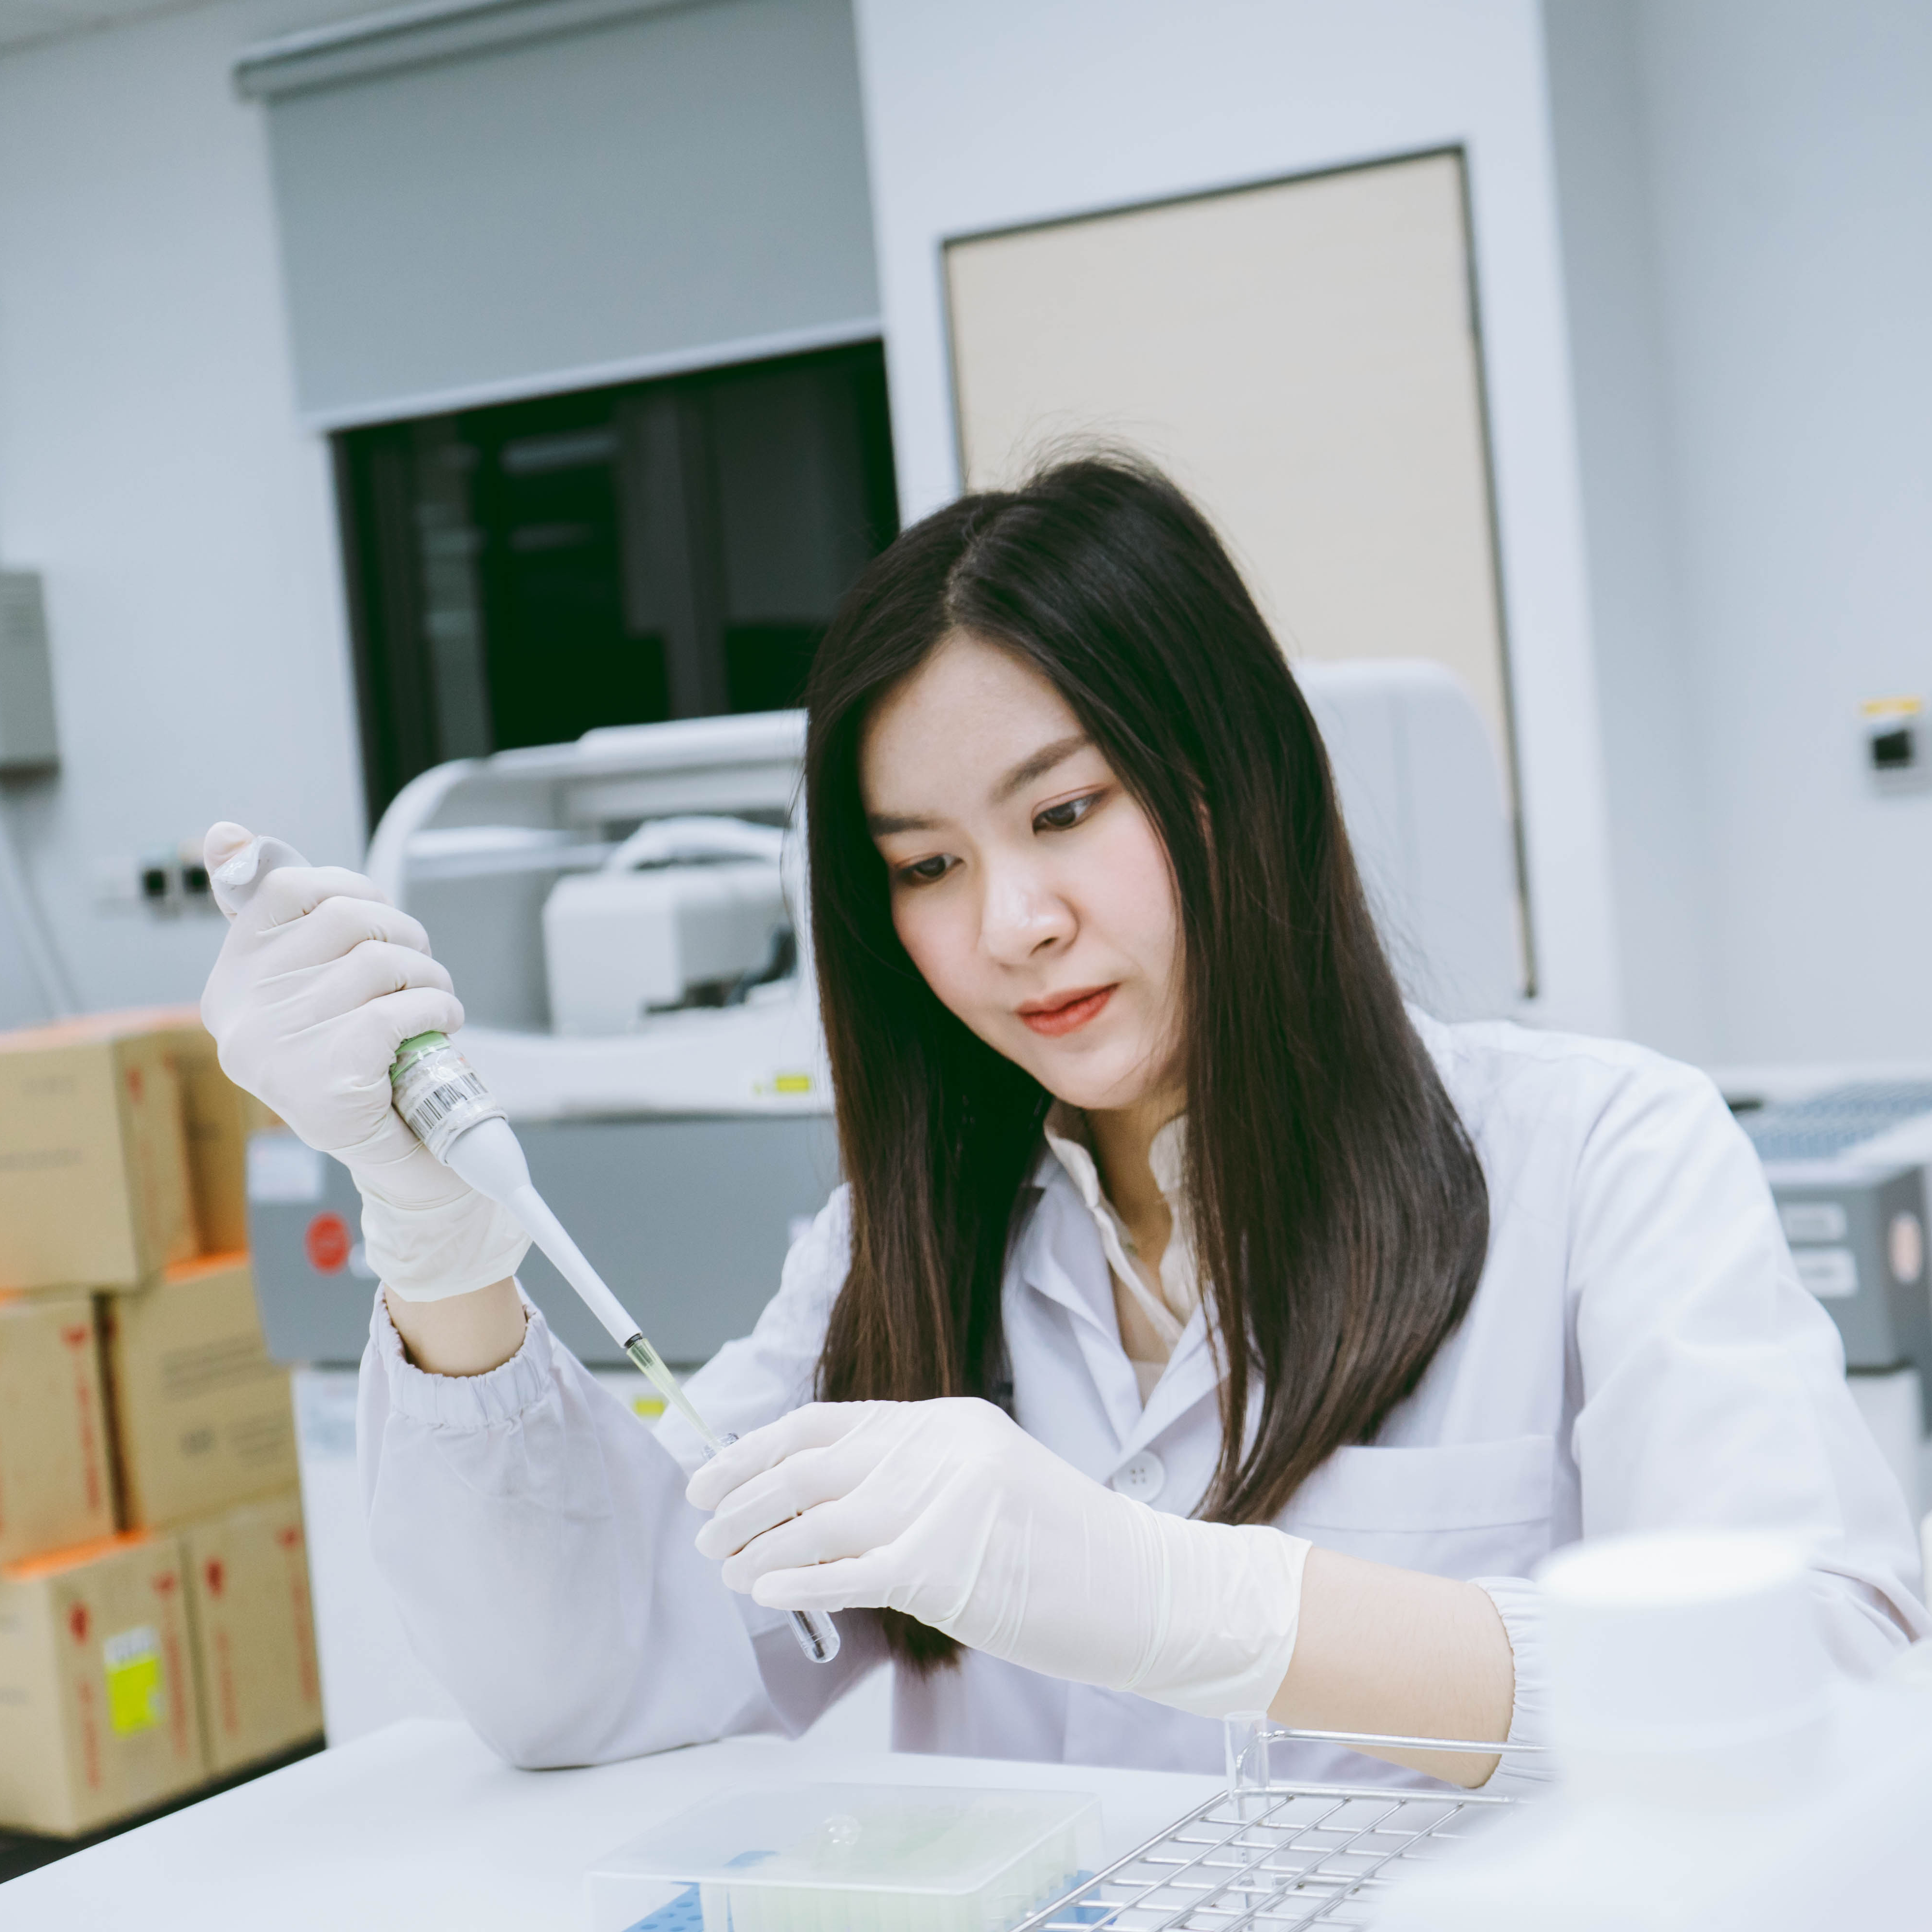 Tips for Choosing a Dependable Lab Equipment Supplier